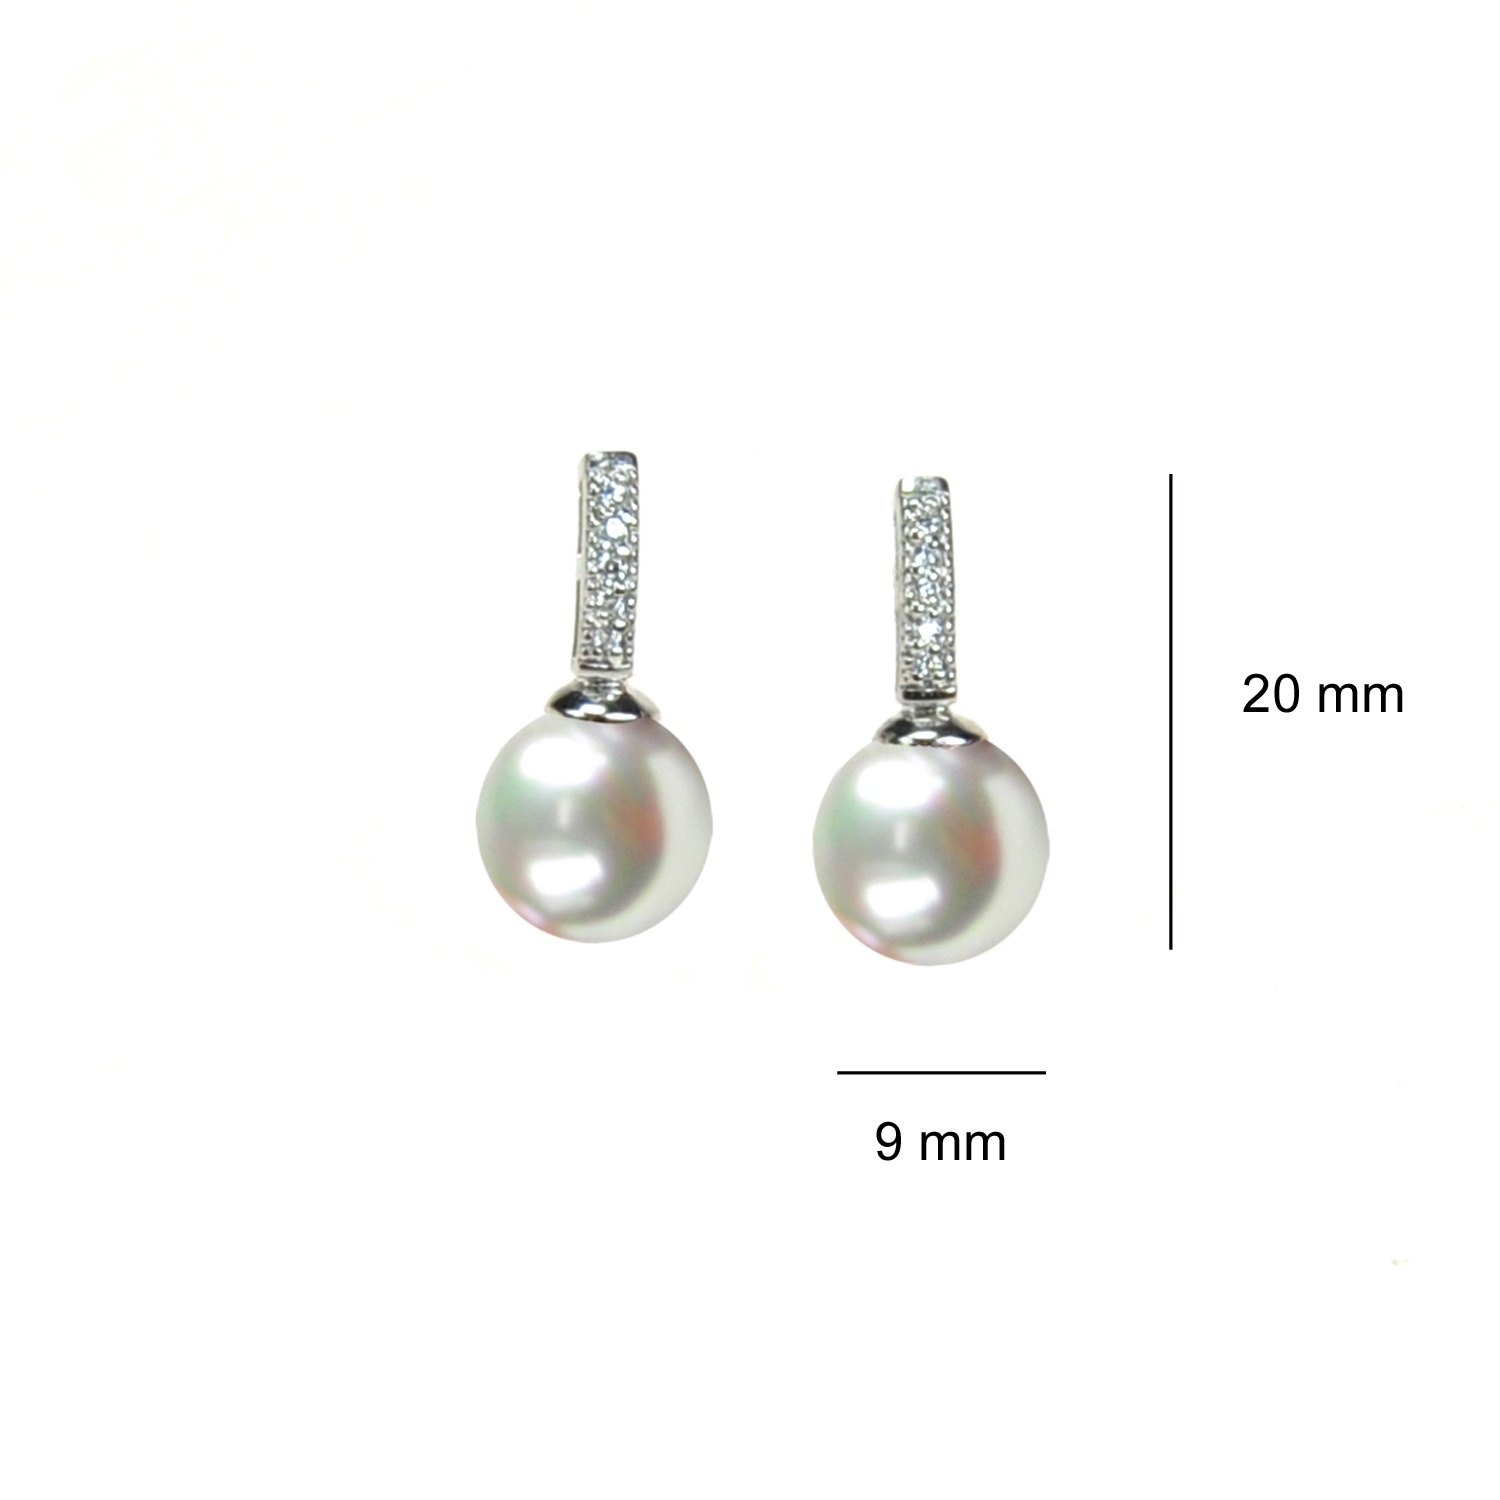 Silver Earrings with 9 mm. White Pearls and Zircons 2